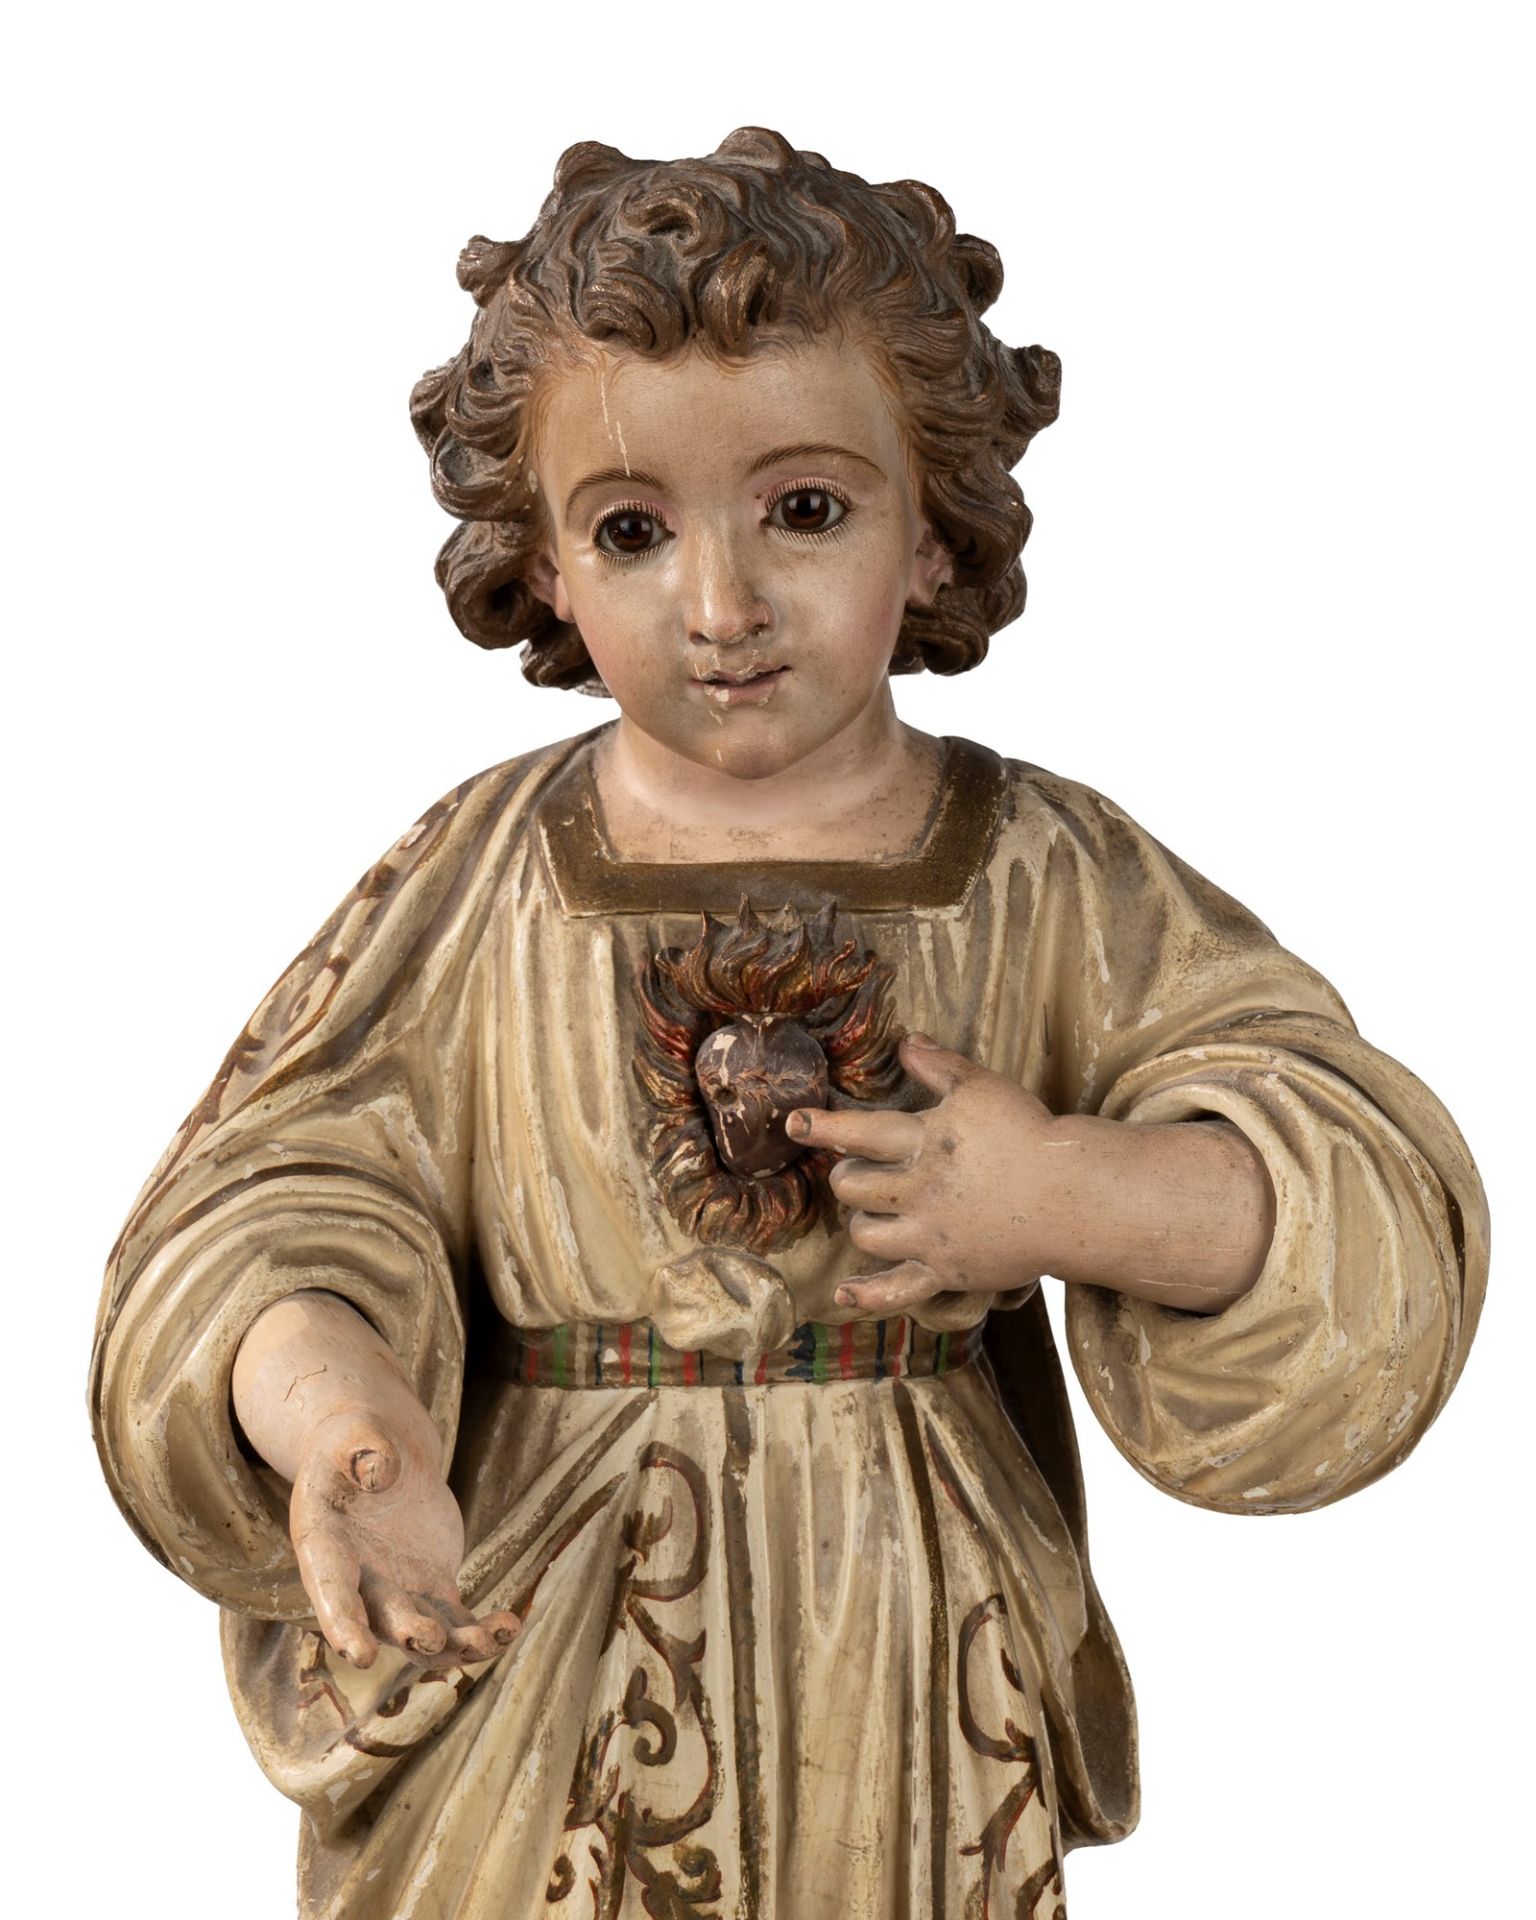 Baby Jesus in carved and lacquered wood, 19th century - Image 3 of 8